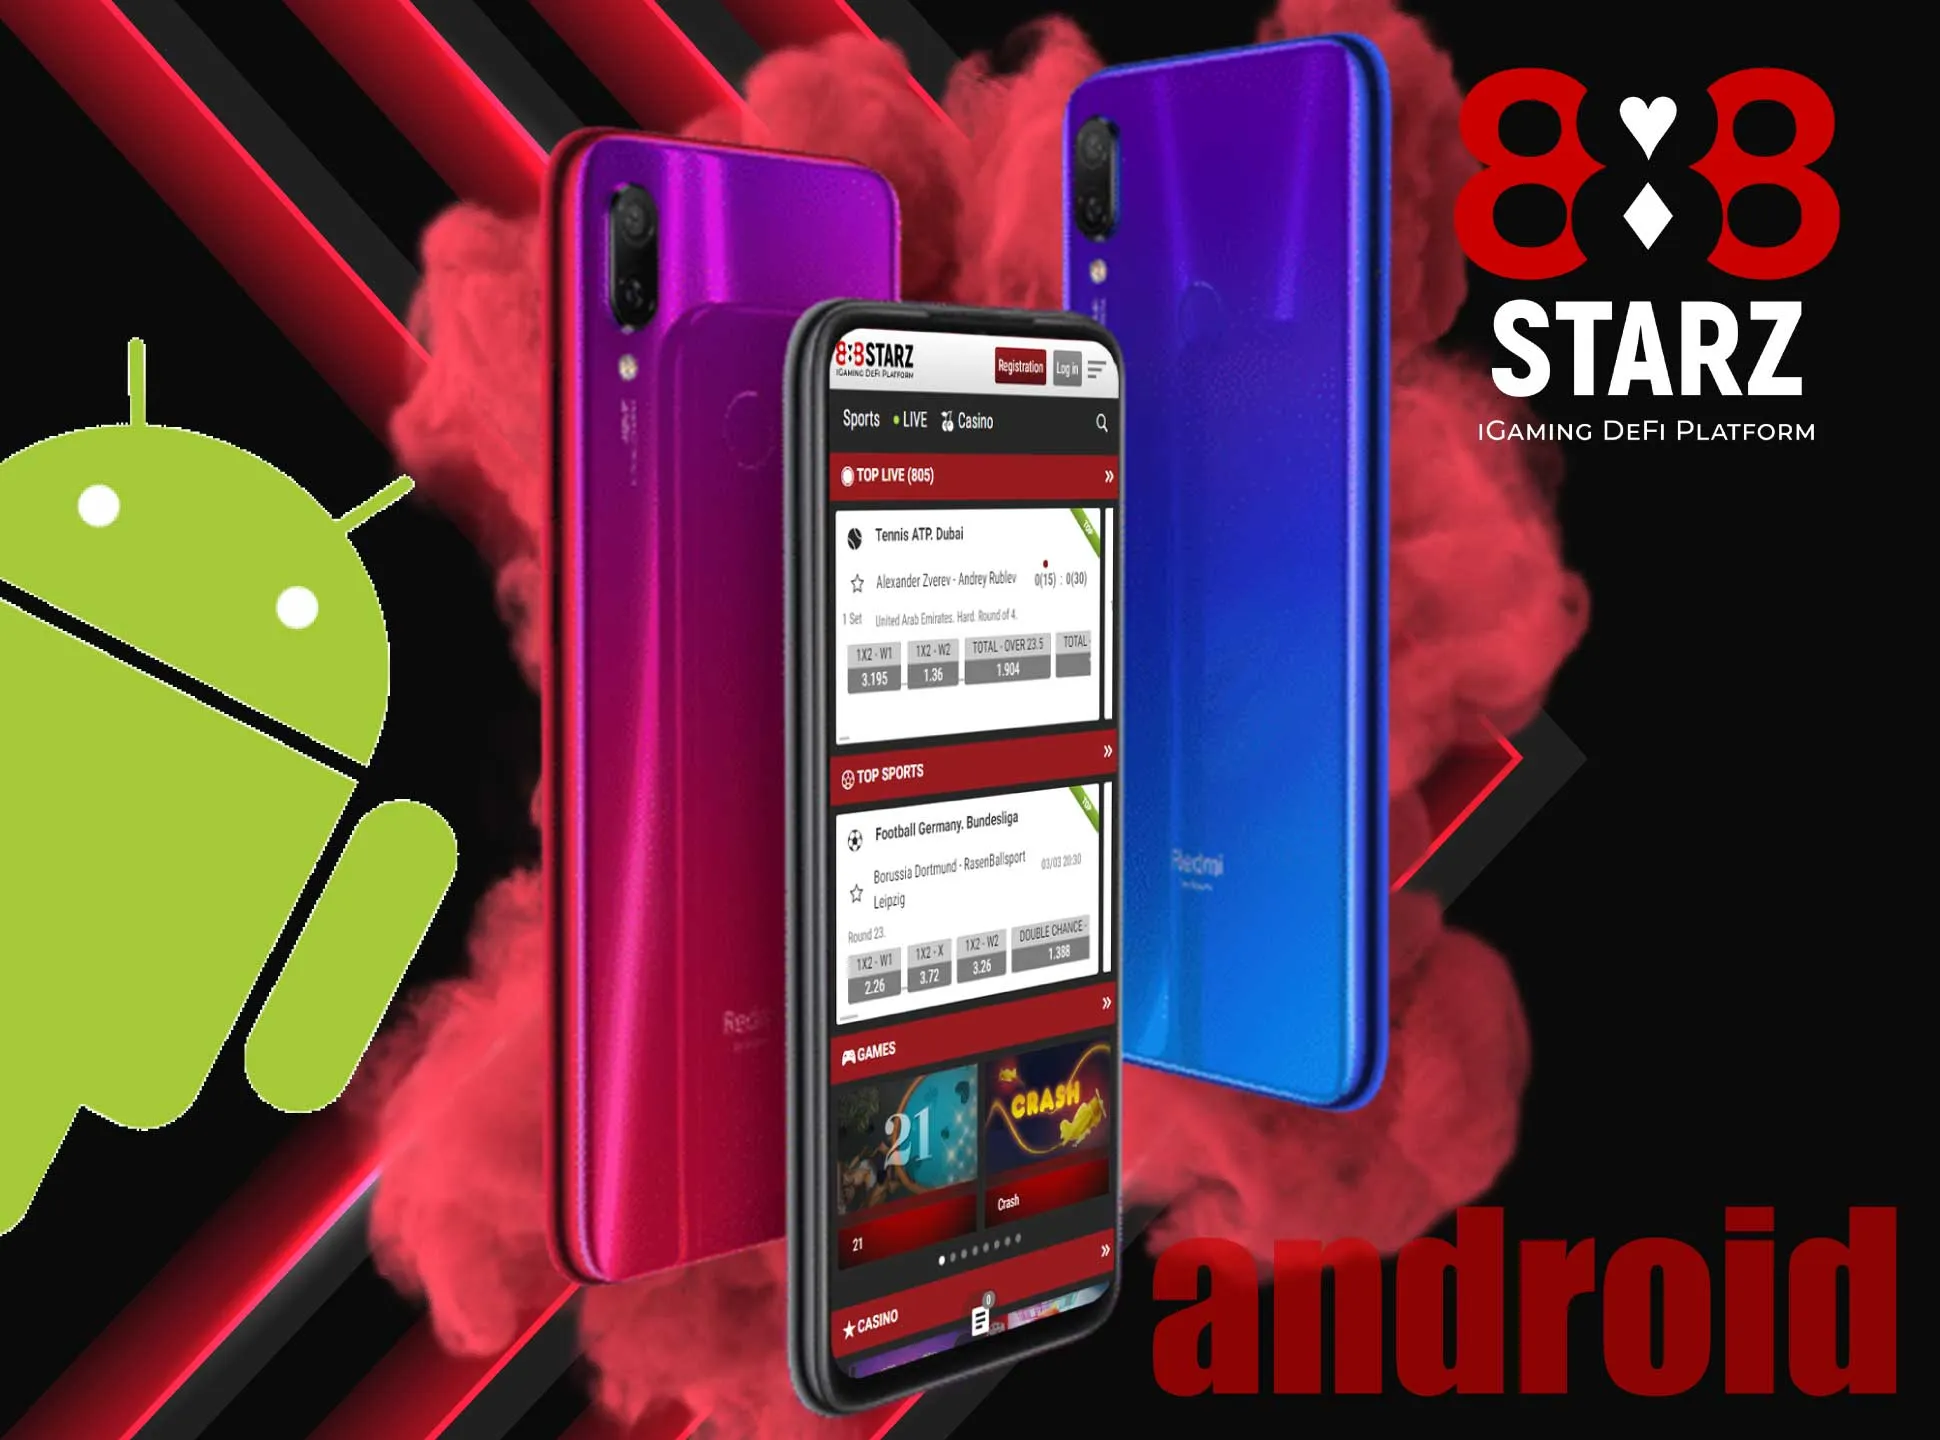 888starz can be installed on the most Android devices.